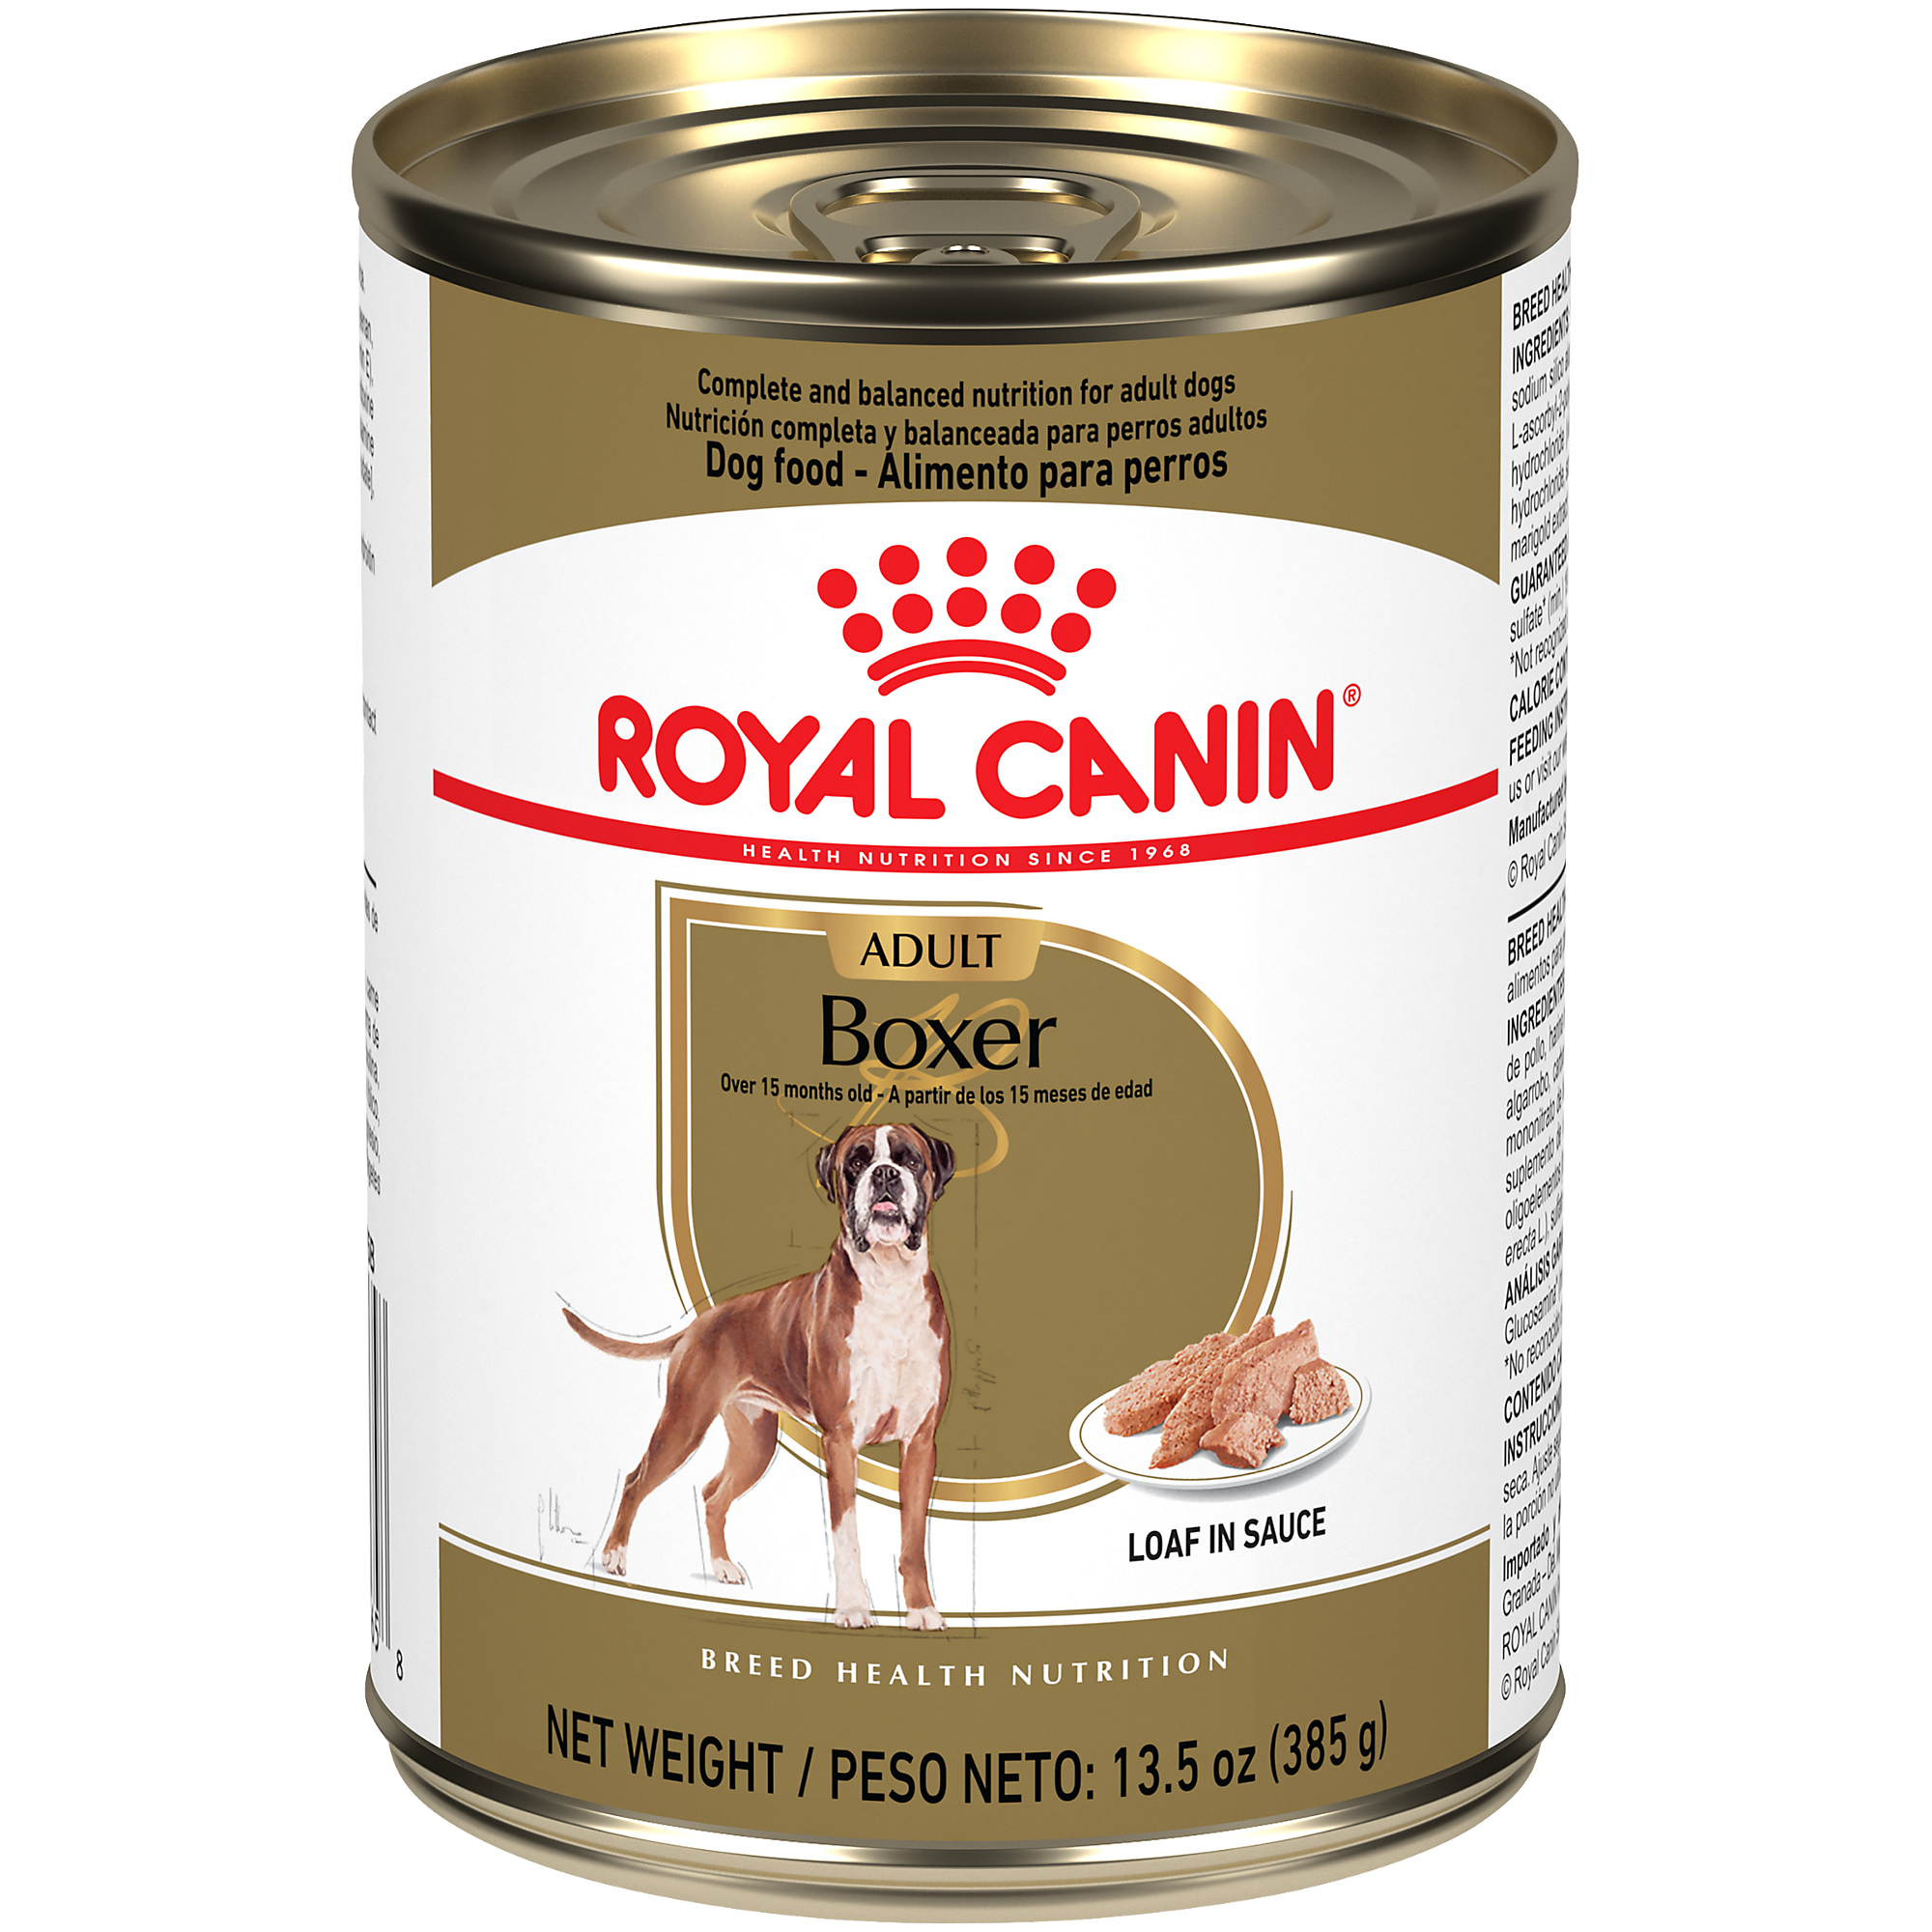 Royal Canin® Breed Health Nutrition® Boxer Adult Loaf in Sauce Dog Food, 13.5 oz